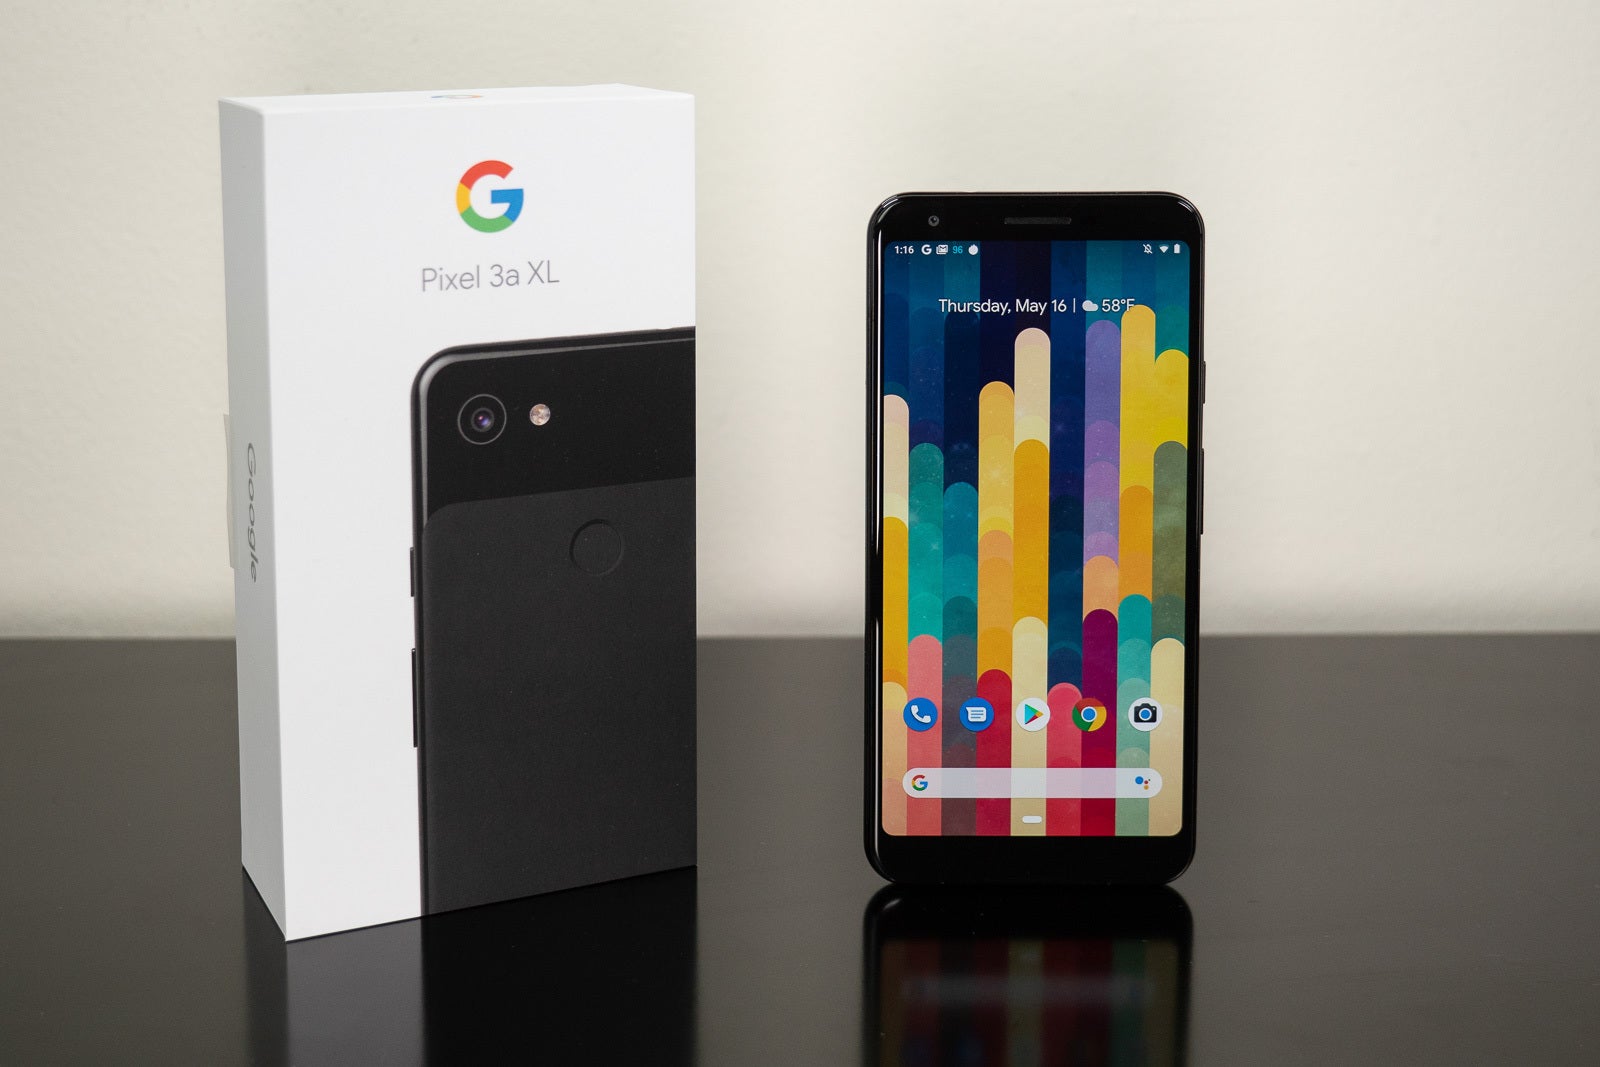 The Pixel madness continues! Grab a Pixel 3a XL up to $150 off, Pixel 4 up to $350 off at Best Buy